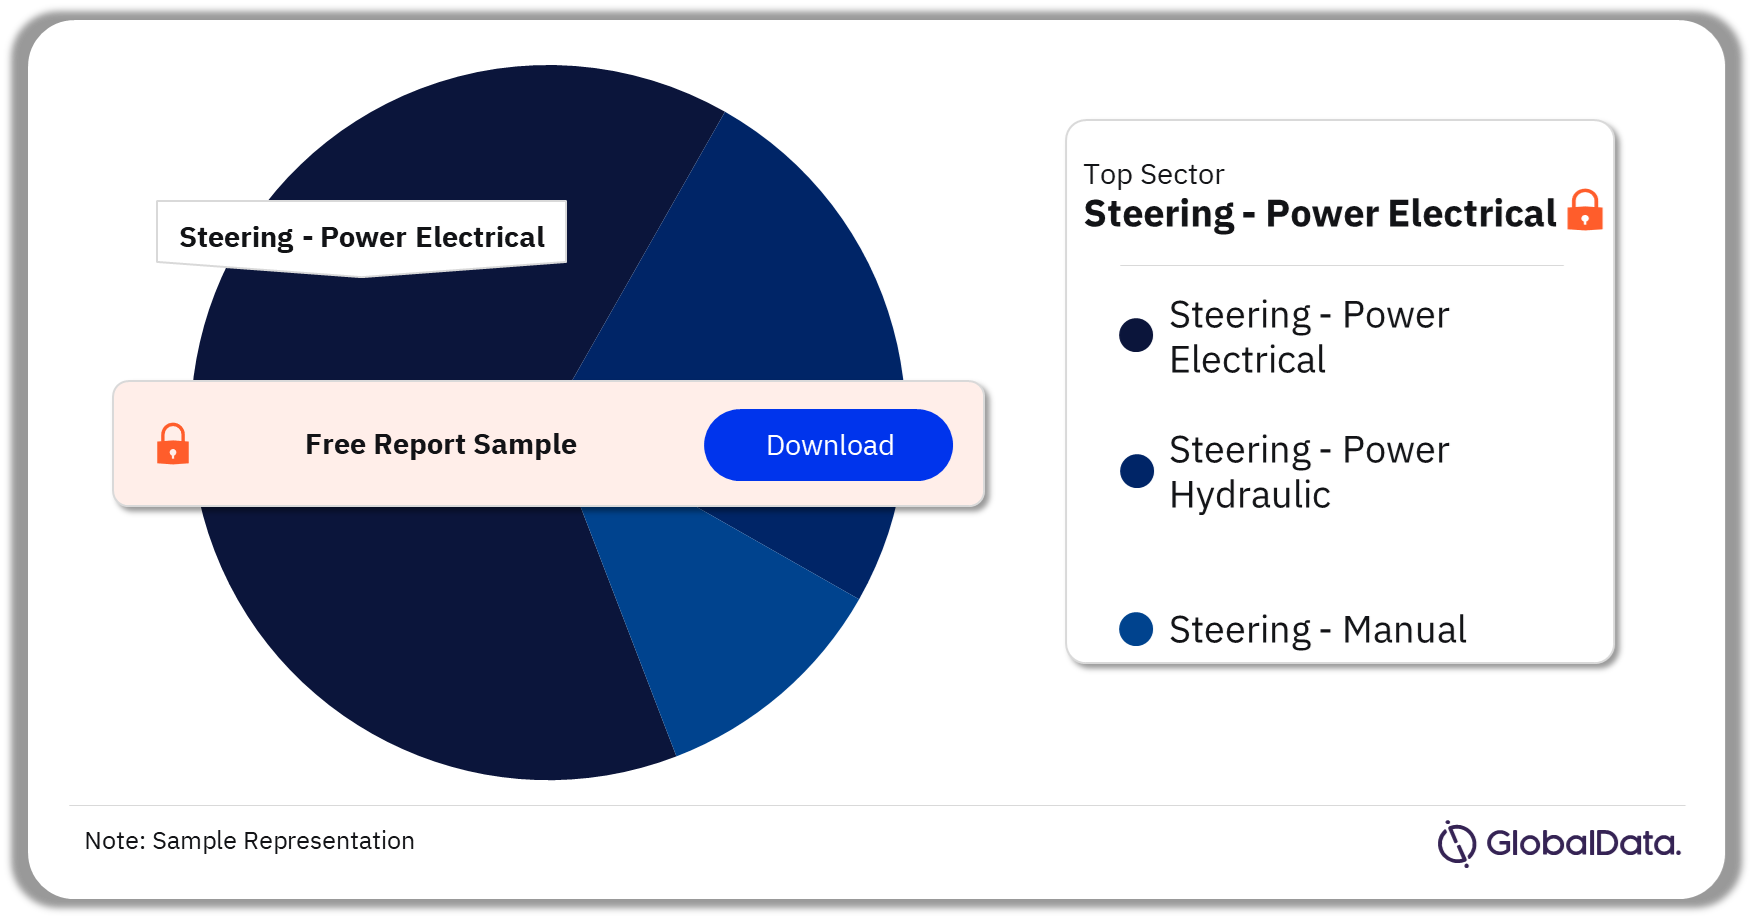 Automotive Steering Systems Market Analysis by Sectors, 2023 (%)